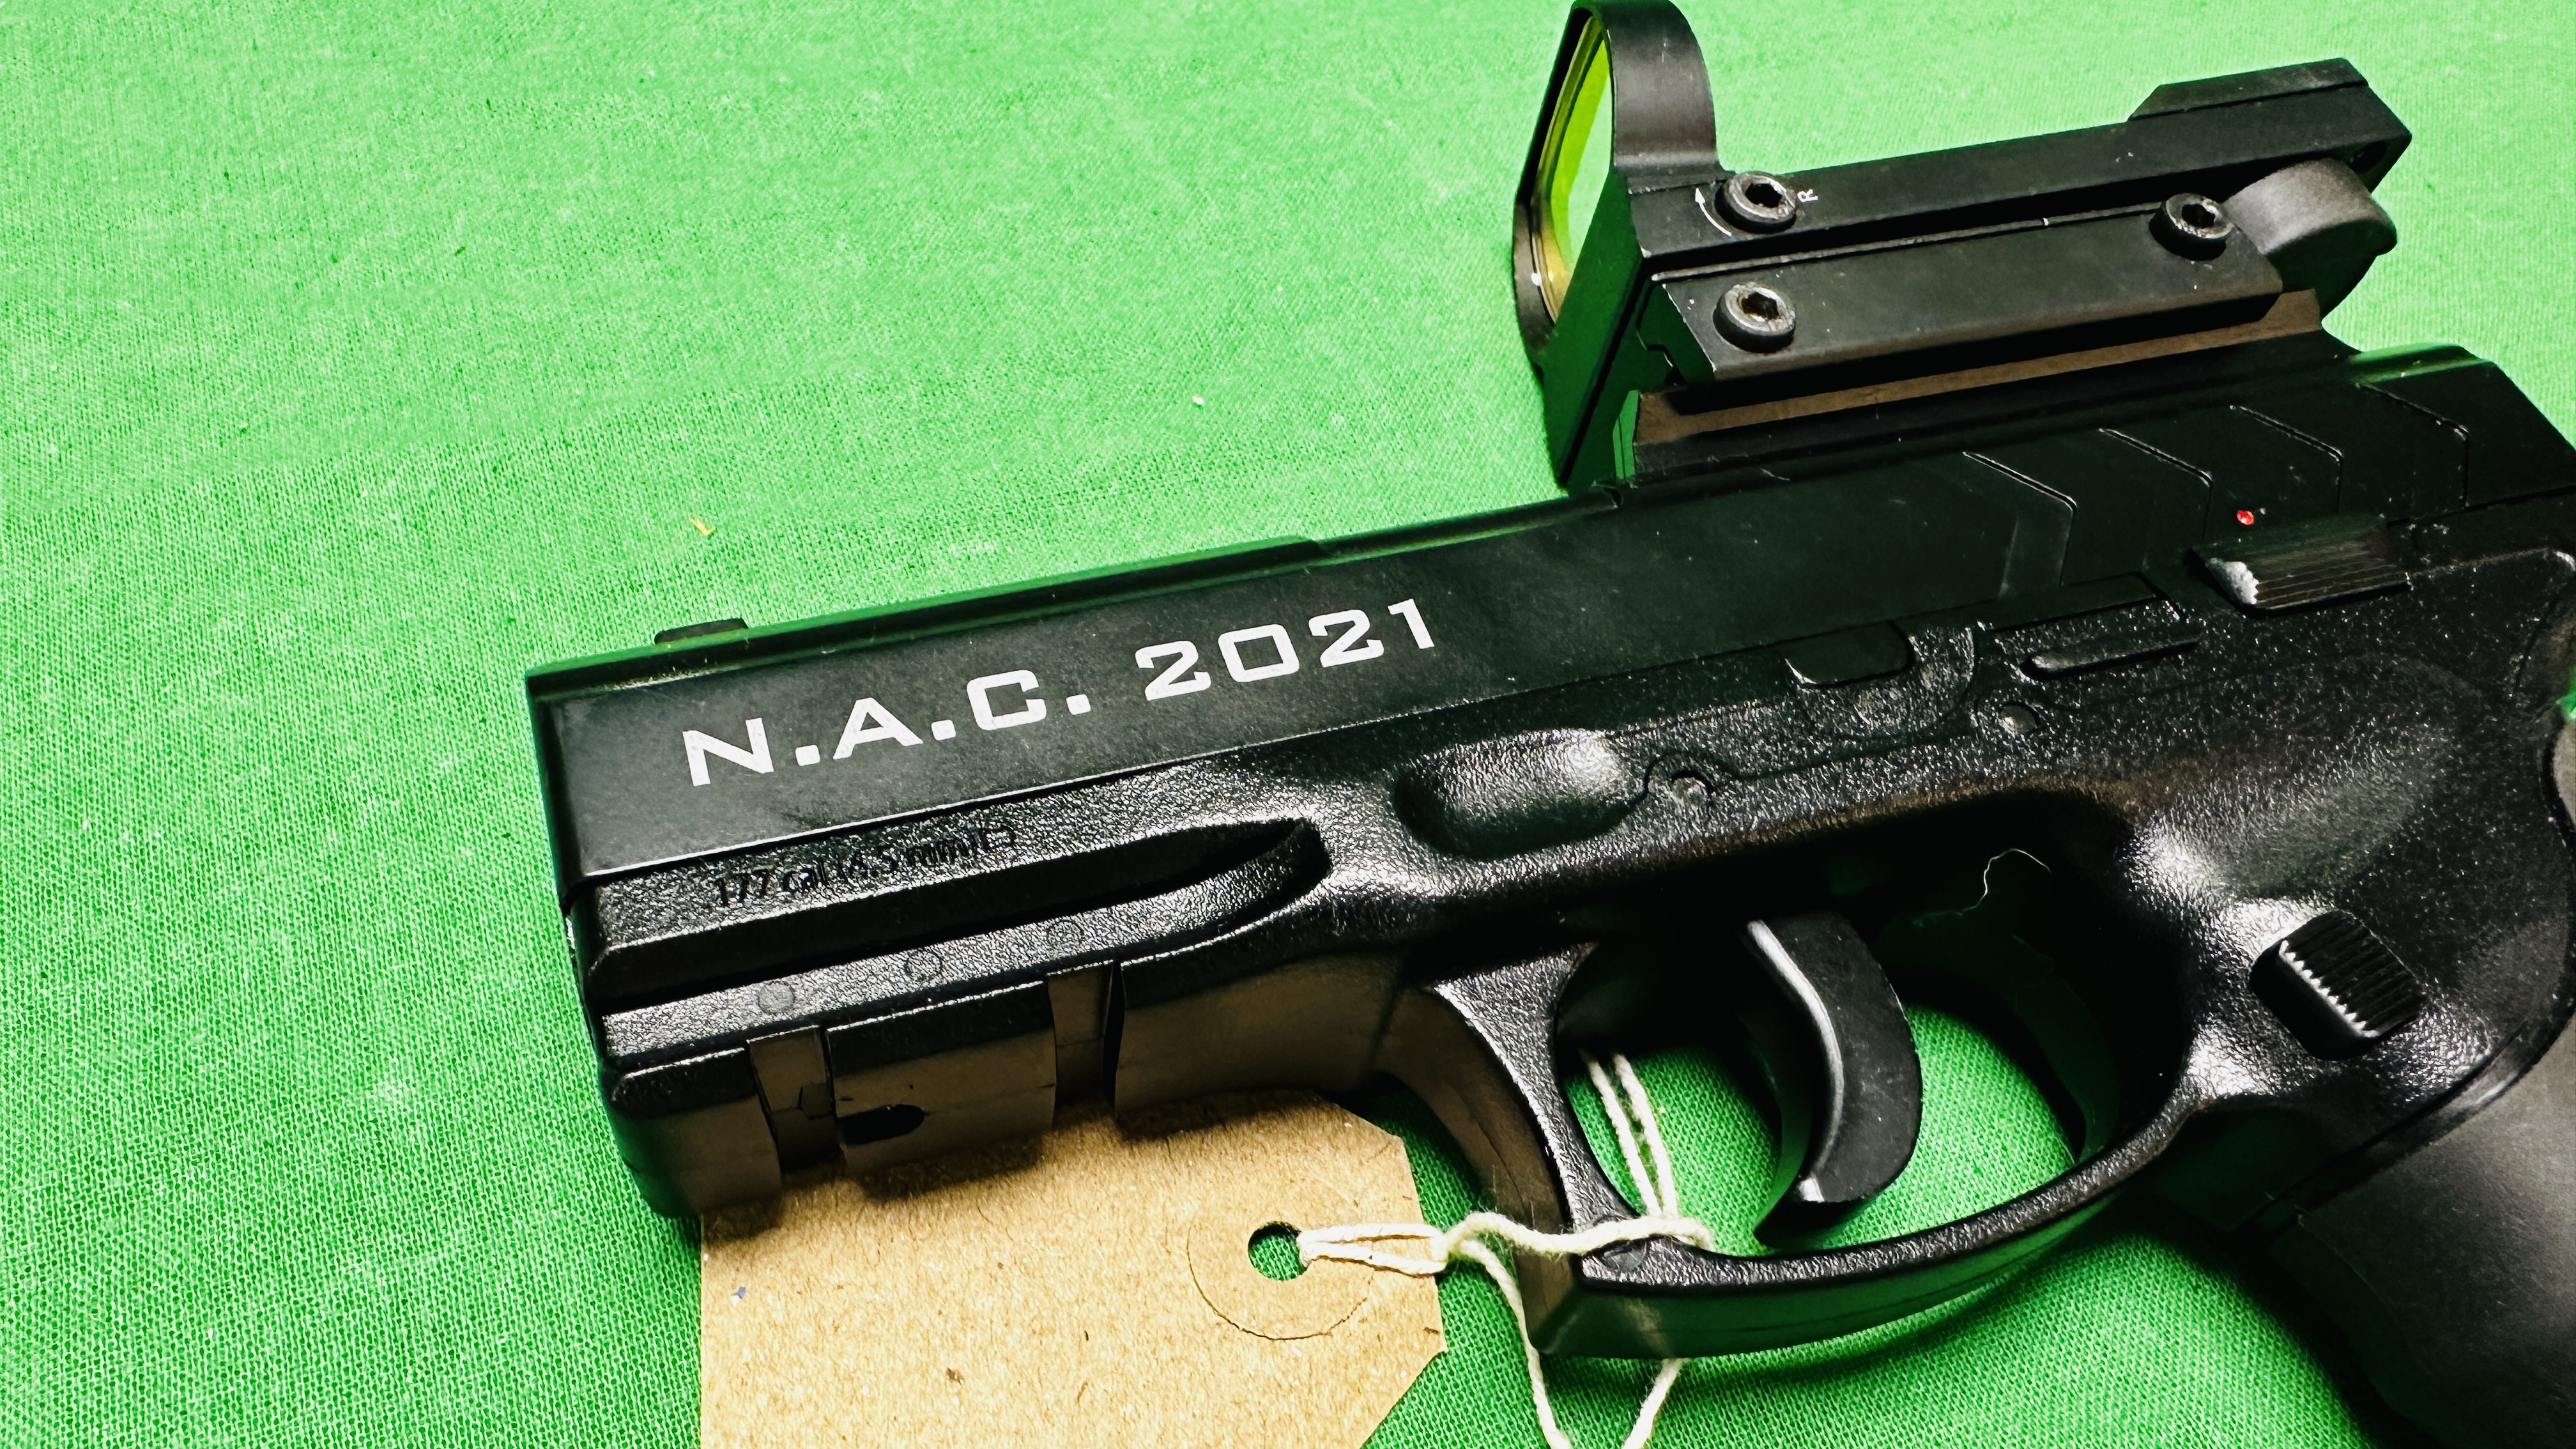 NORICA NAC 2021 CO2 MULTI SHOT AIR PISTOL COMPLETE WITH SIGHT - (ALL GUNS TO BE INSPECTED AND - Image 6 of 9